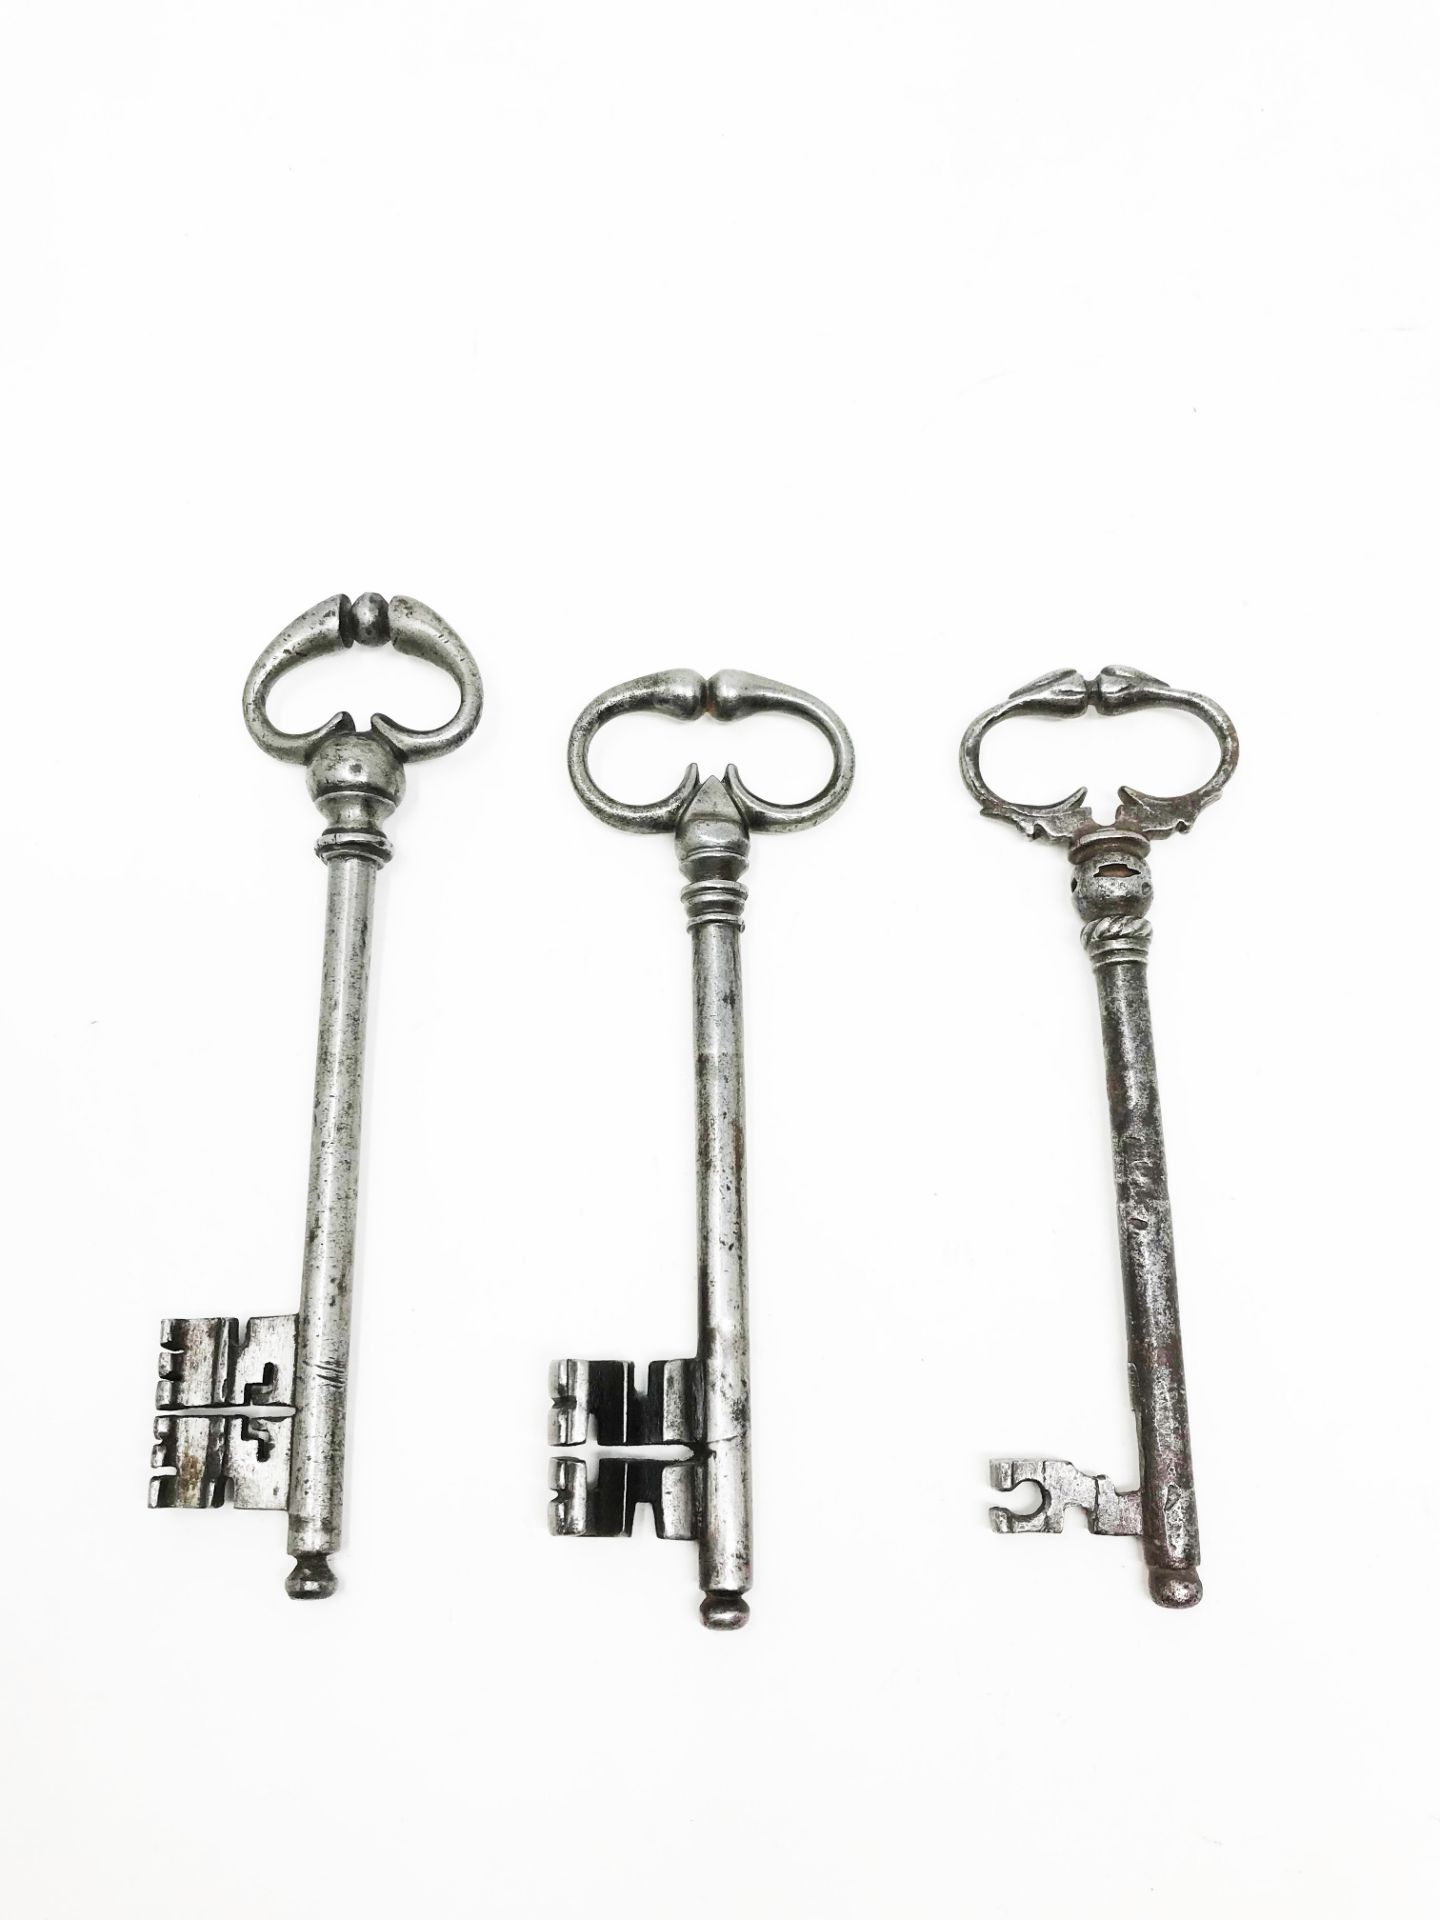 Three keys with frog's legs rings15, 47 - 14, 47 - 14, 05 cm Part of the chapter "From Enlightenment